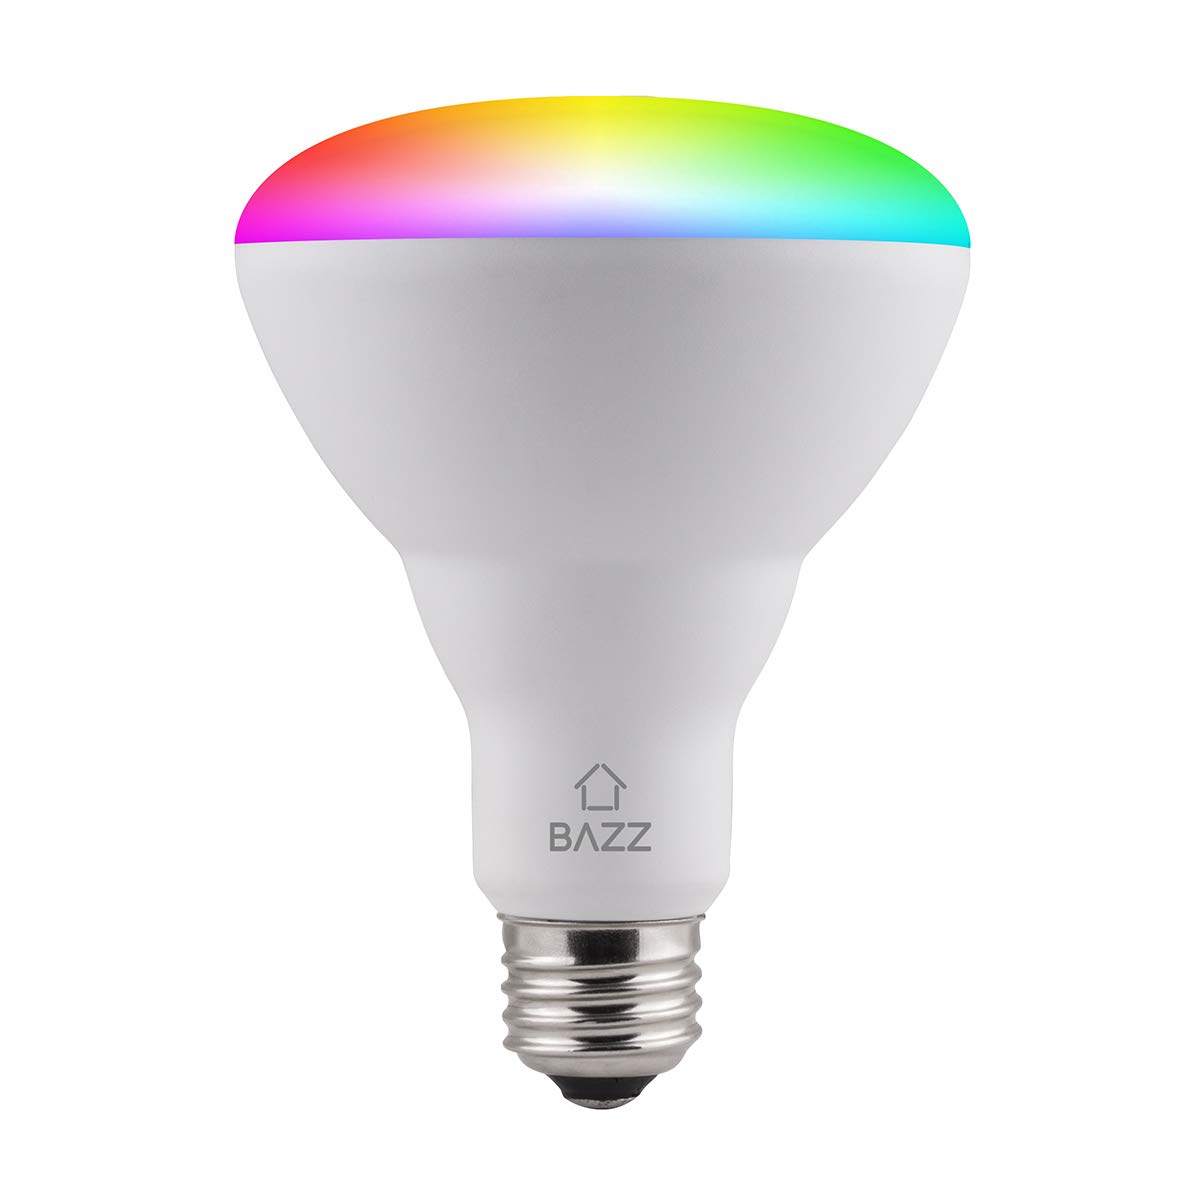 BAZZ BR30RGBTNWWF Smart Wi-Fi LED RGB BR30 10W Bulb, Dimmable, Energy Star, Color Change, Outdoor, Alexa and Google Home Compatible, Matte White